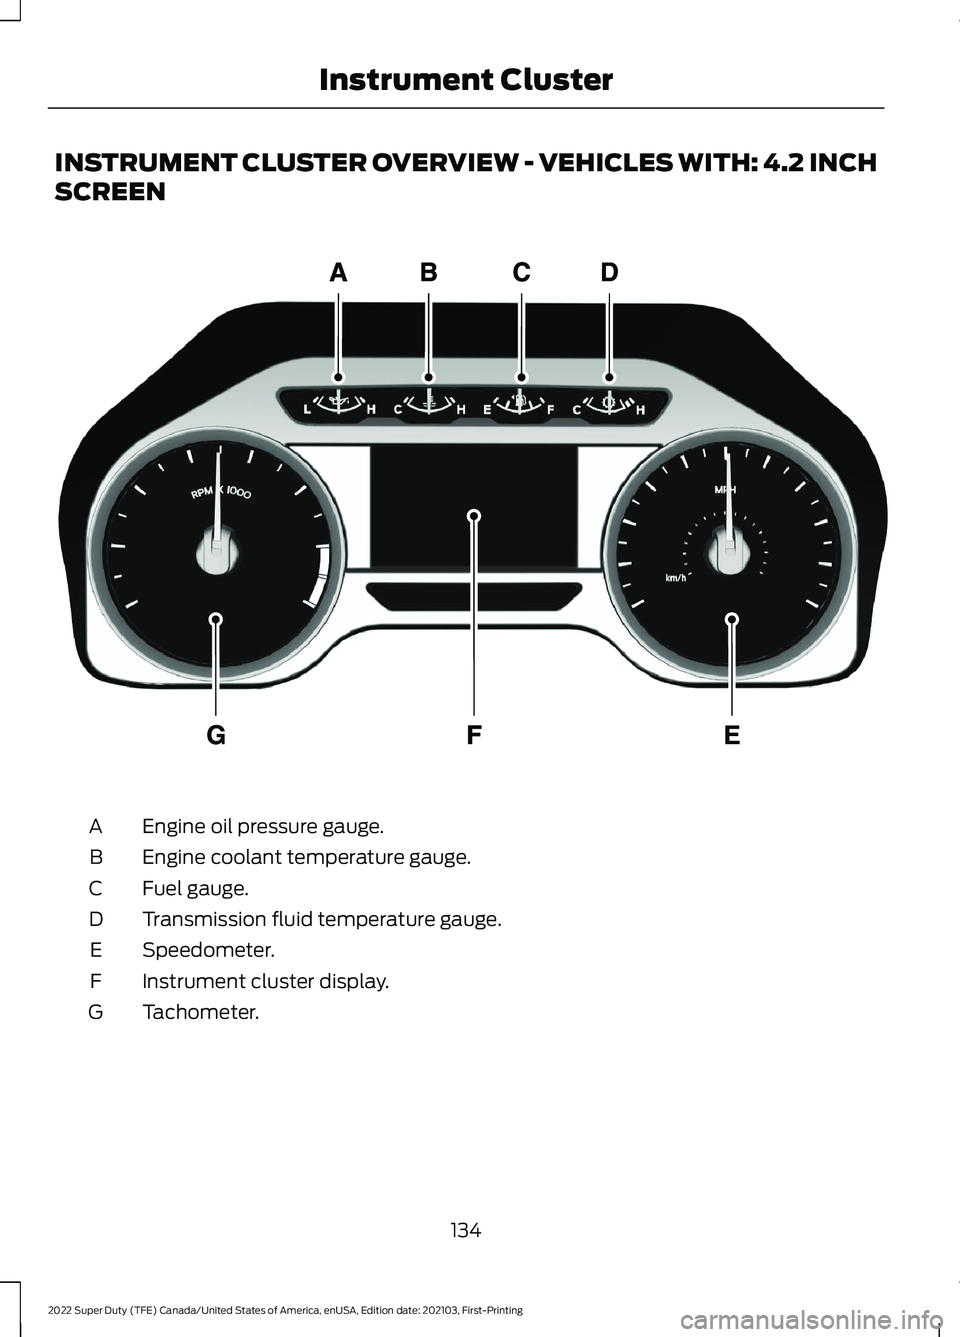 FORD F-350 2022  Owners Manual INSTRUMENT CLUSTER OVERVIEW - VEHICLES WITH: 4.2 INCH
SCREEN
Engine oil pressure gauge.
A
Engine coolant temperature gauge.
B
Fuel gauge.
C
Transmission fluid temperature gauge.
D
Speedometer.
E
Instr